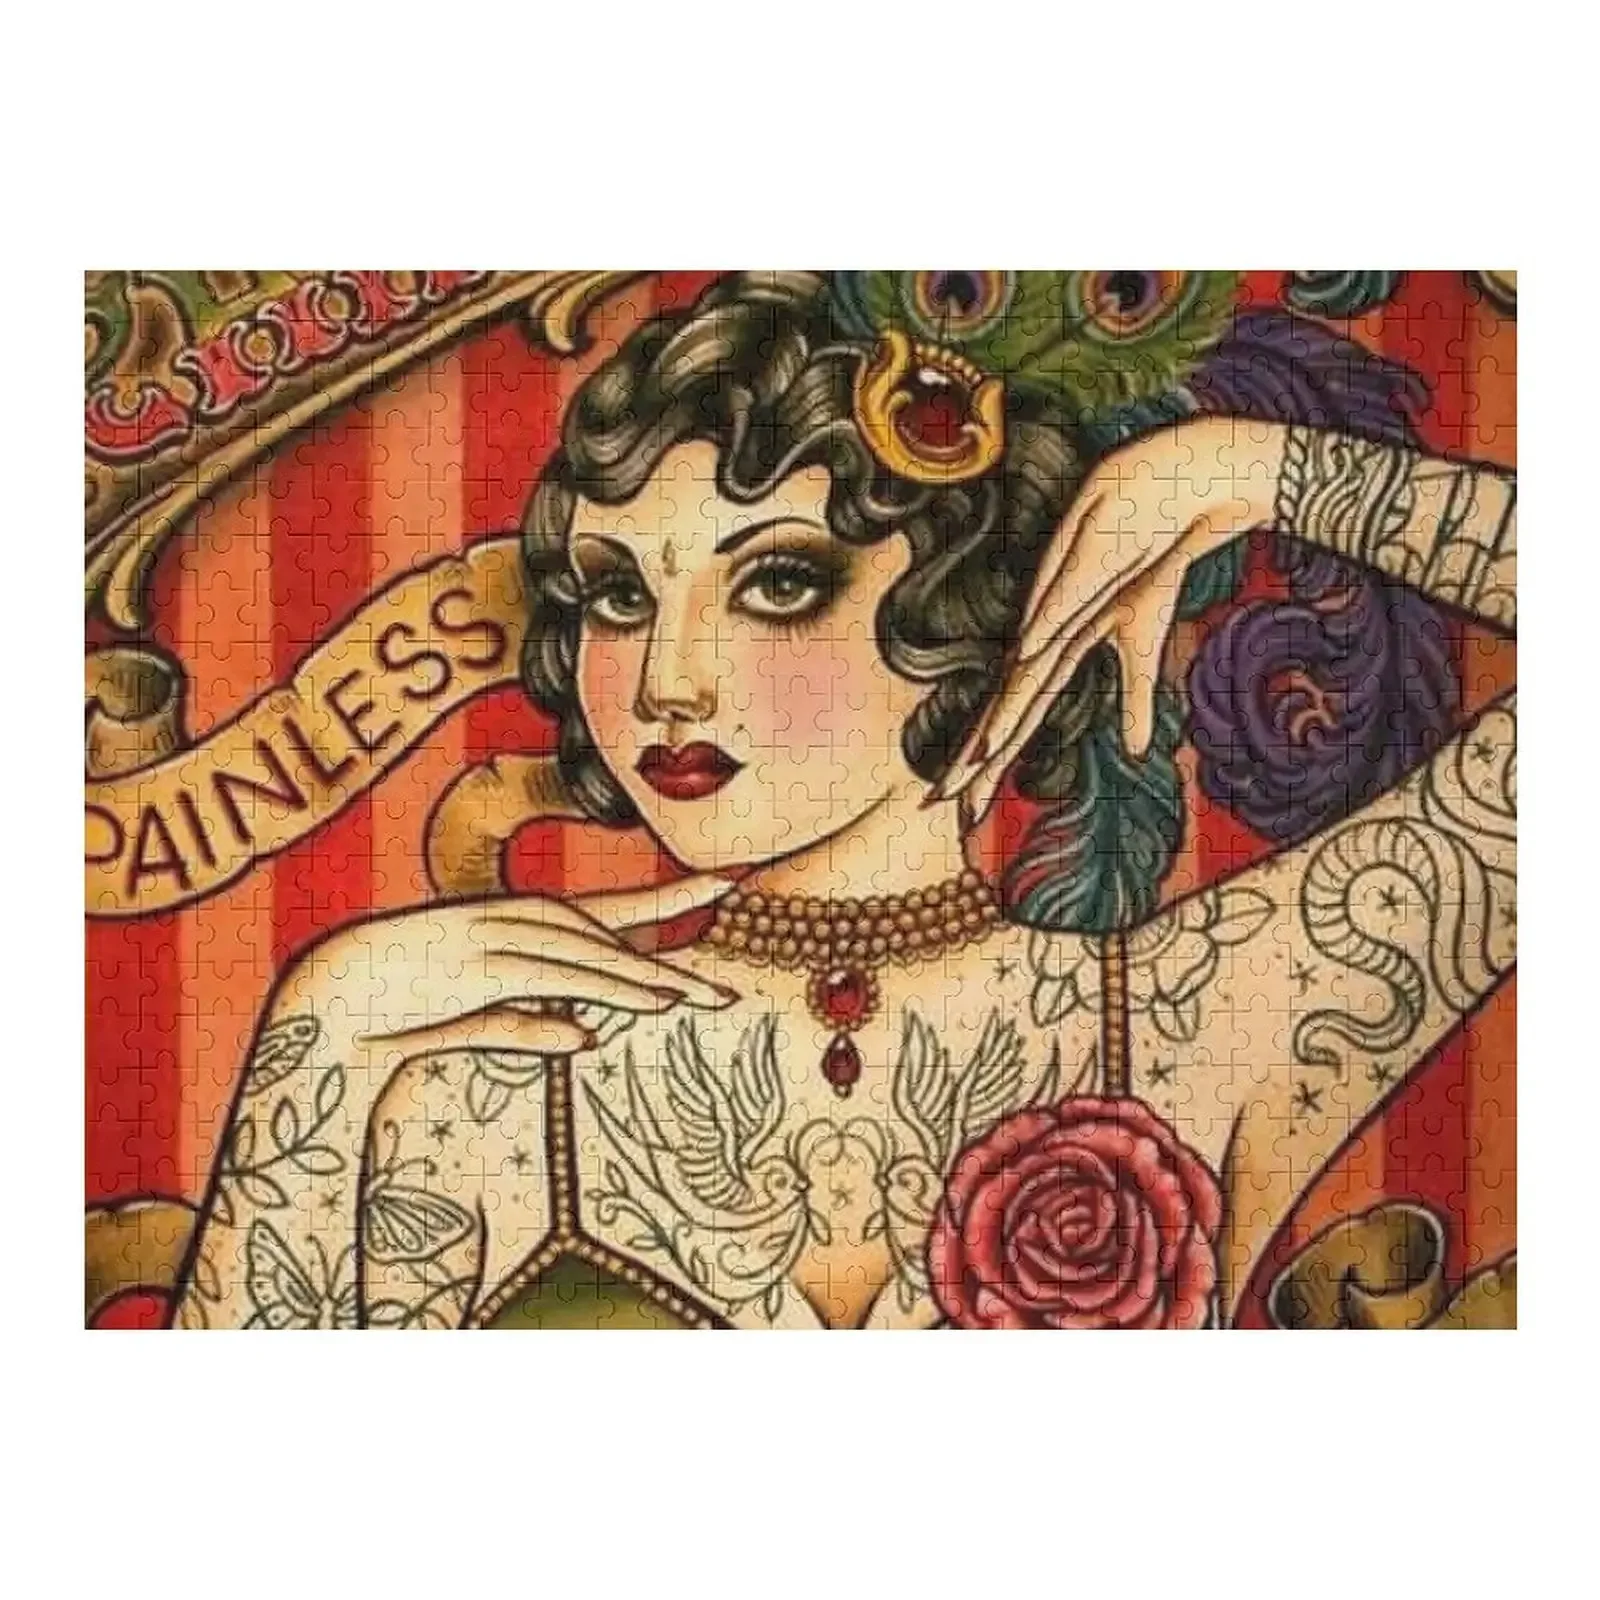 

CHAPEL TATTOO; Vintage Body Advertising Art Jigsaw Puzzle Customized Kids Gift Personalized Gift Ideas Puzzle